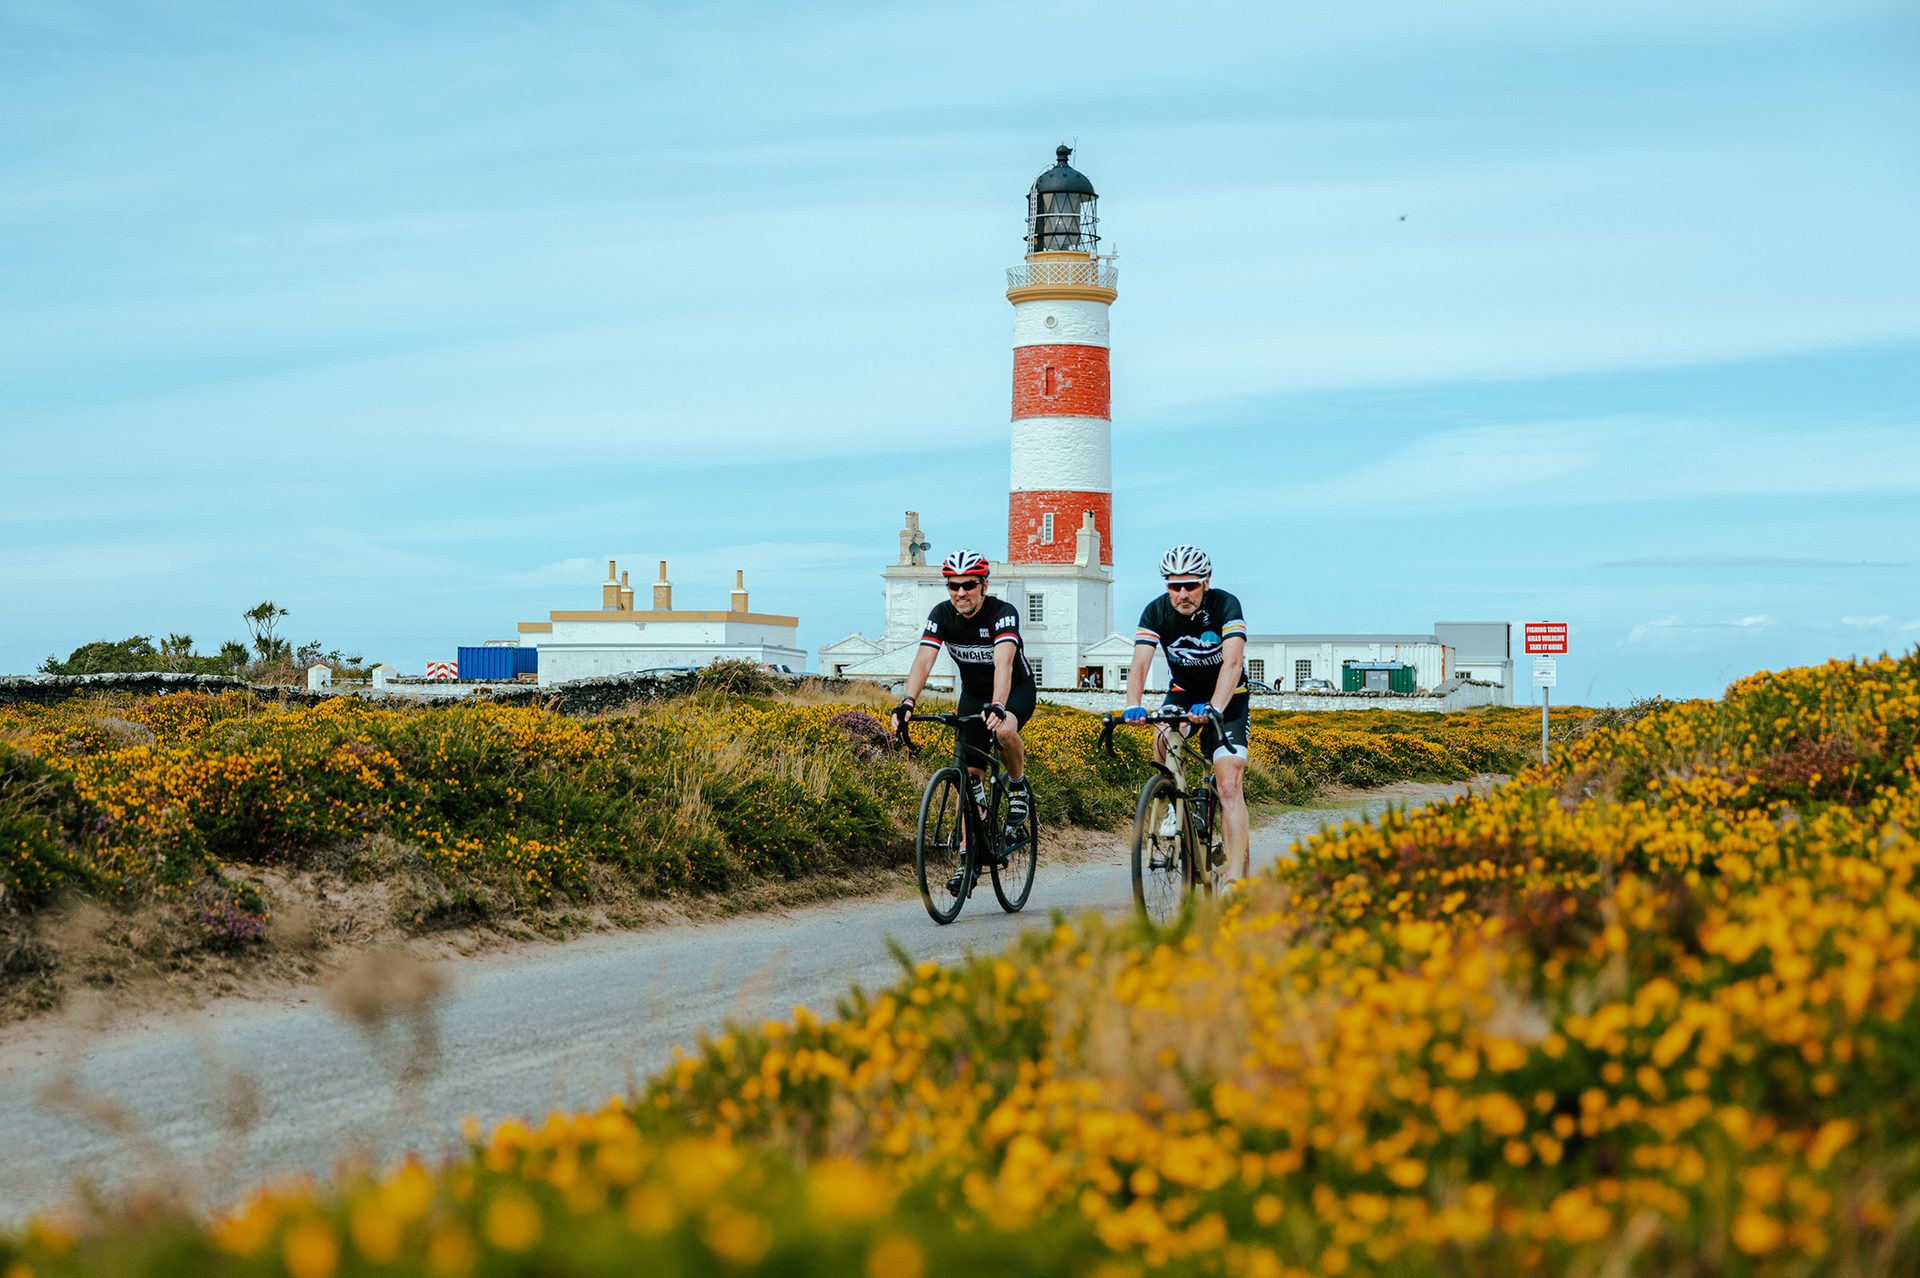 Bicycles--Equipment and supplies, Natural landscape, Bicycle handlebar, Flower, Plant, Sky, Lighthouse, Cloud, Asphalt